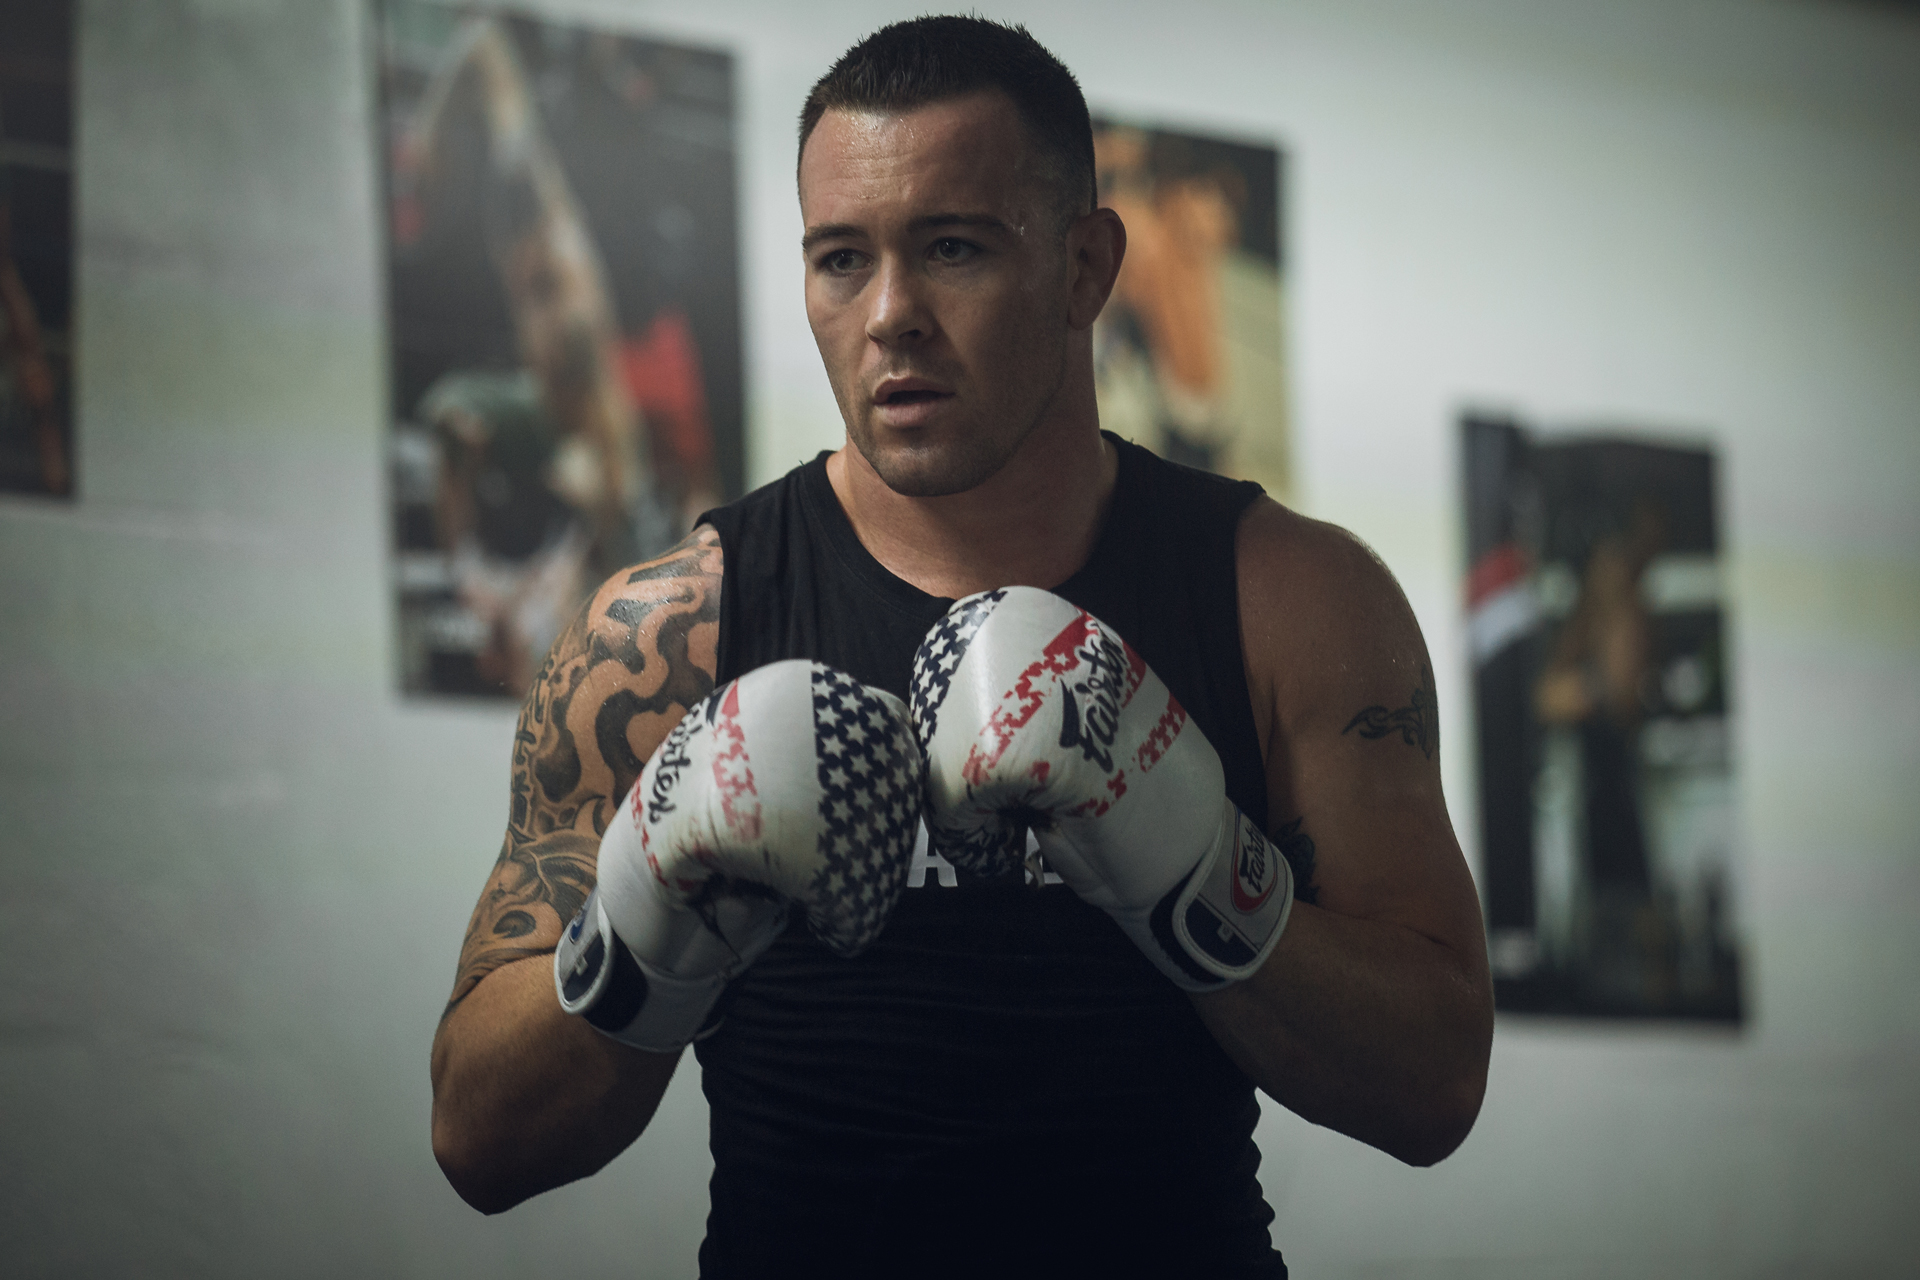 UFC’s Colby Covington visits the world’s largest cannabis dispensary